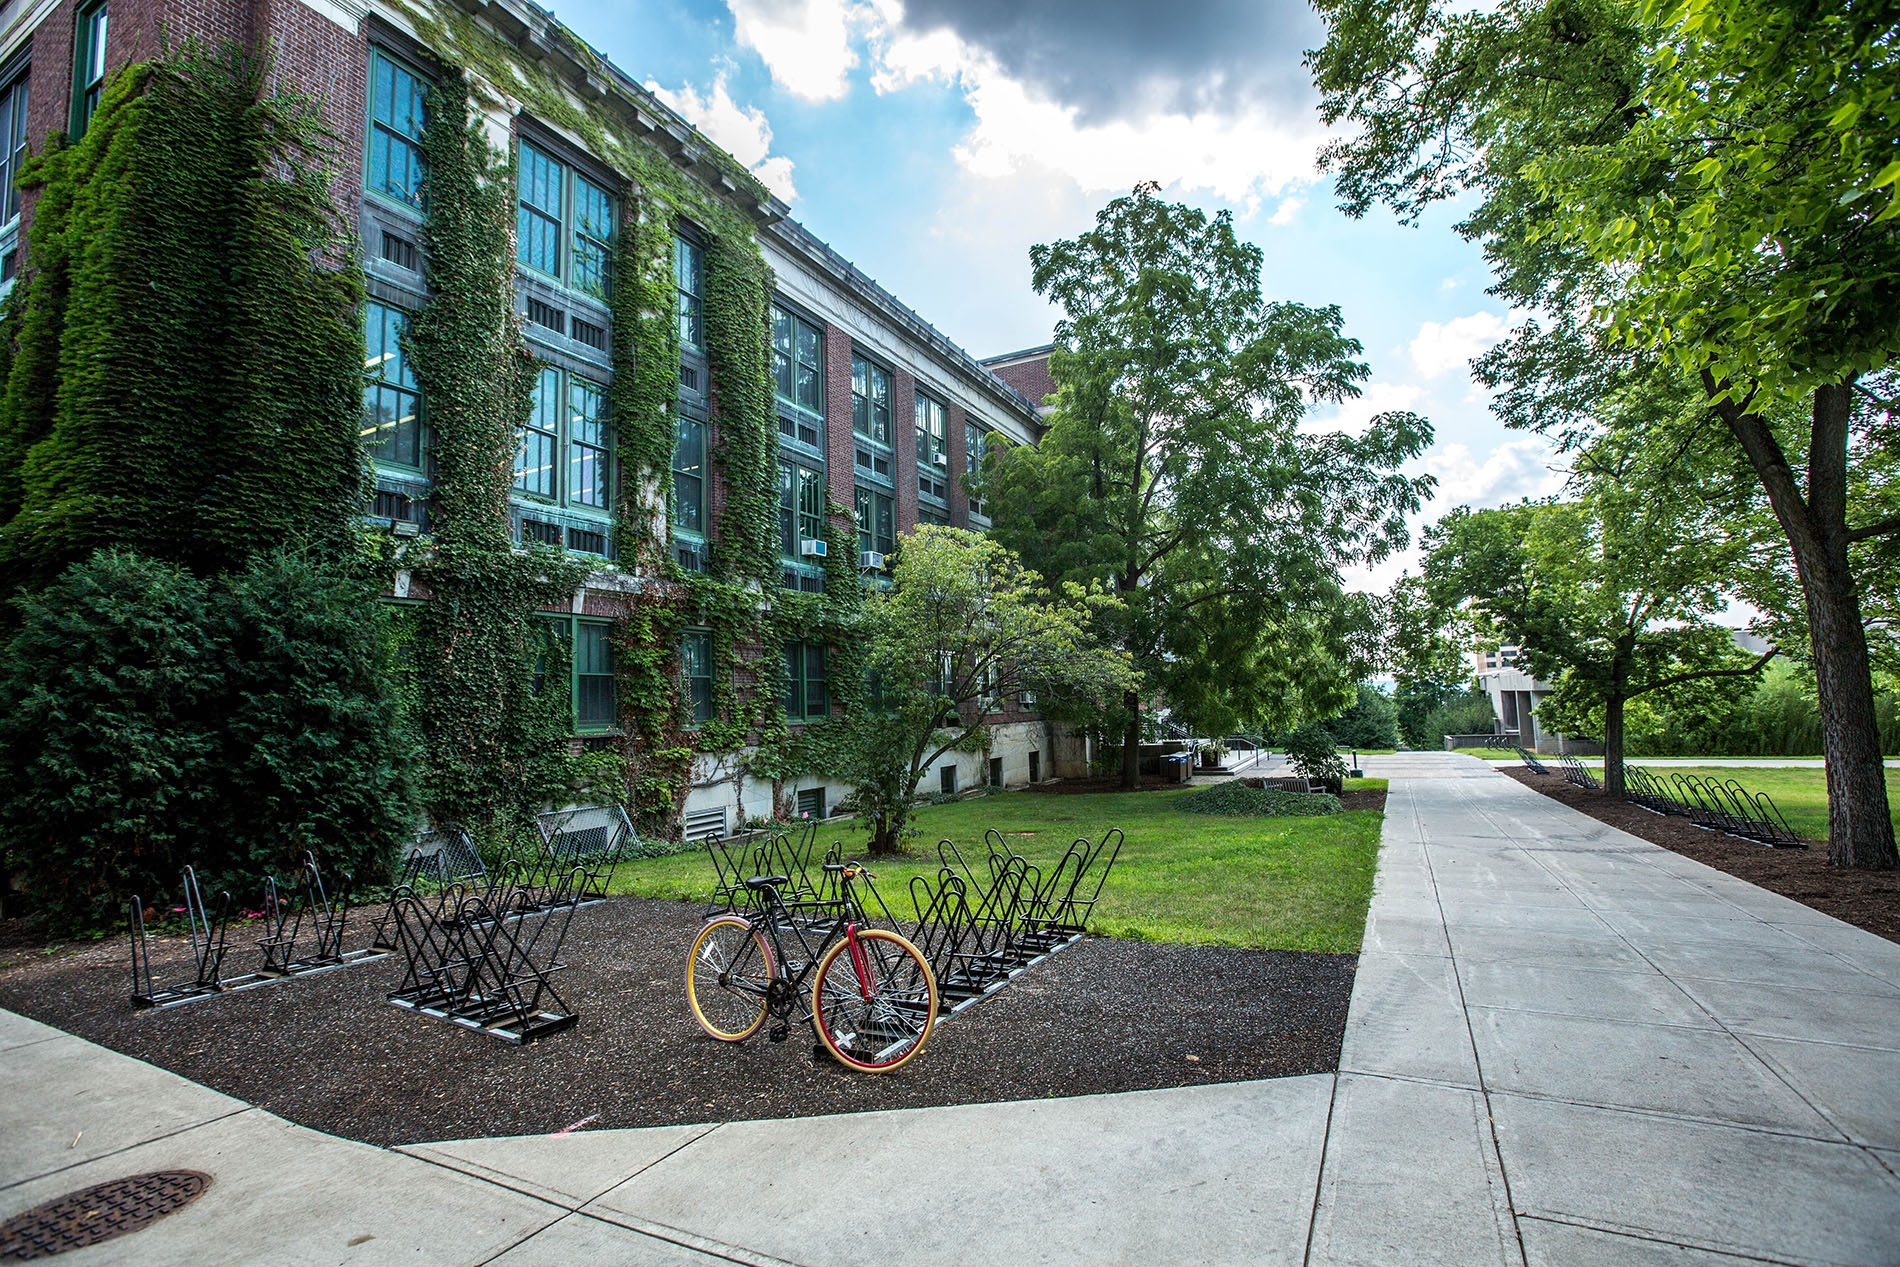 A college campus with a brick building covered in ivy and a bicycle at the bike racks in front of the building.